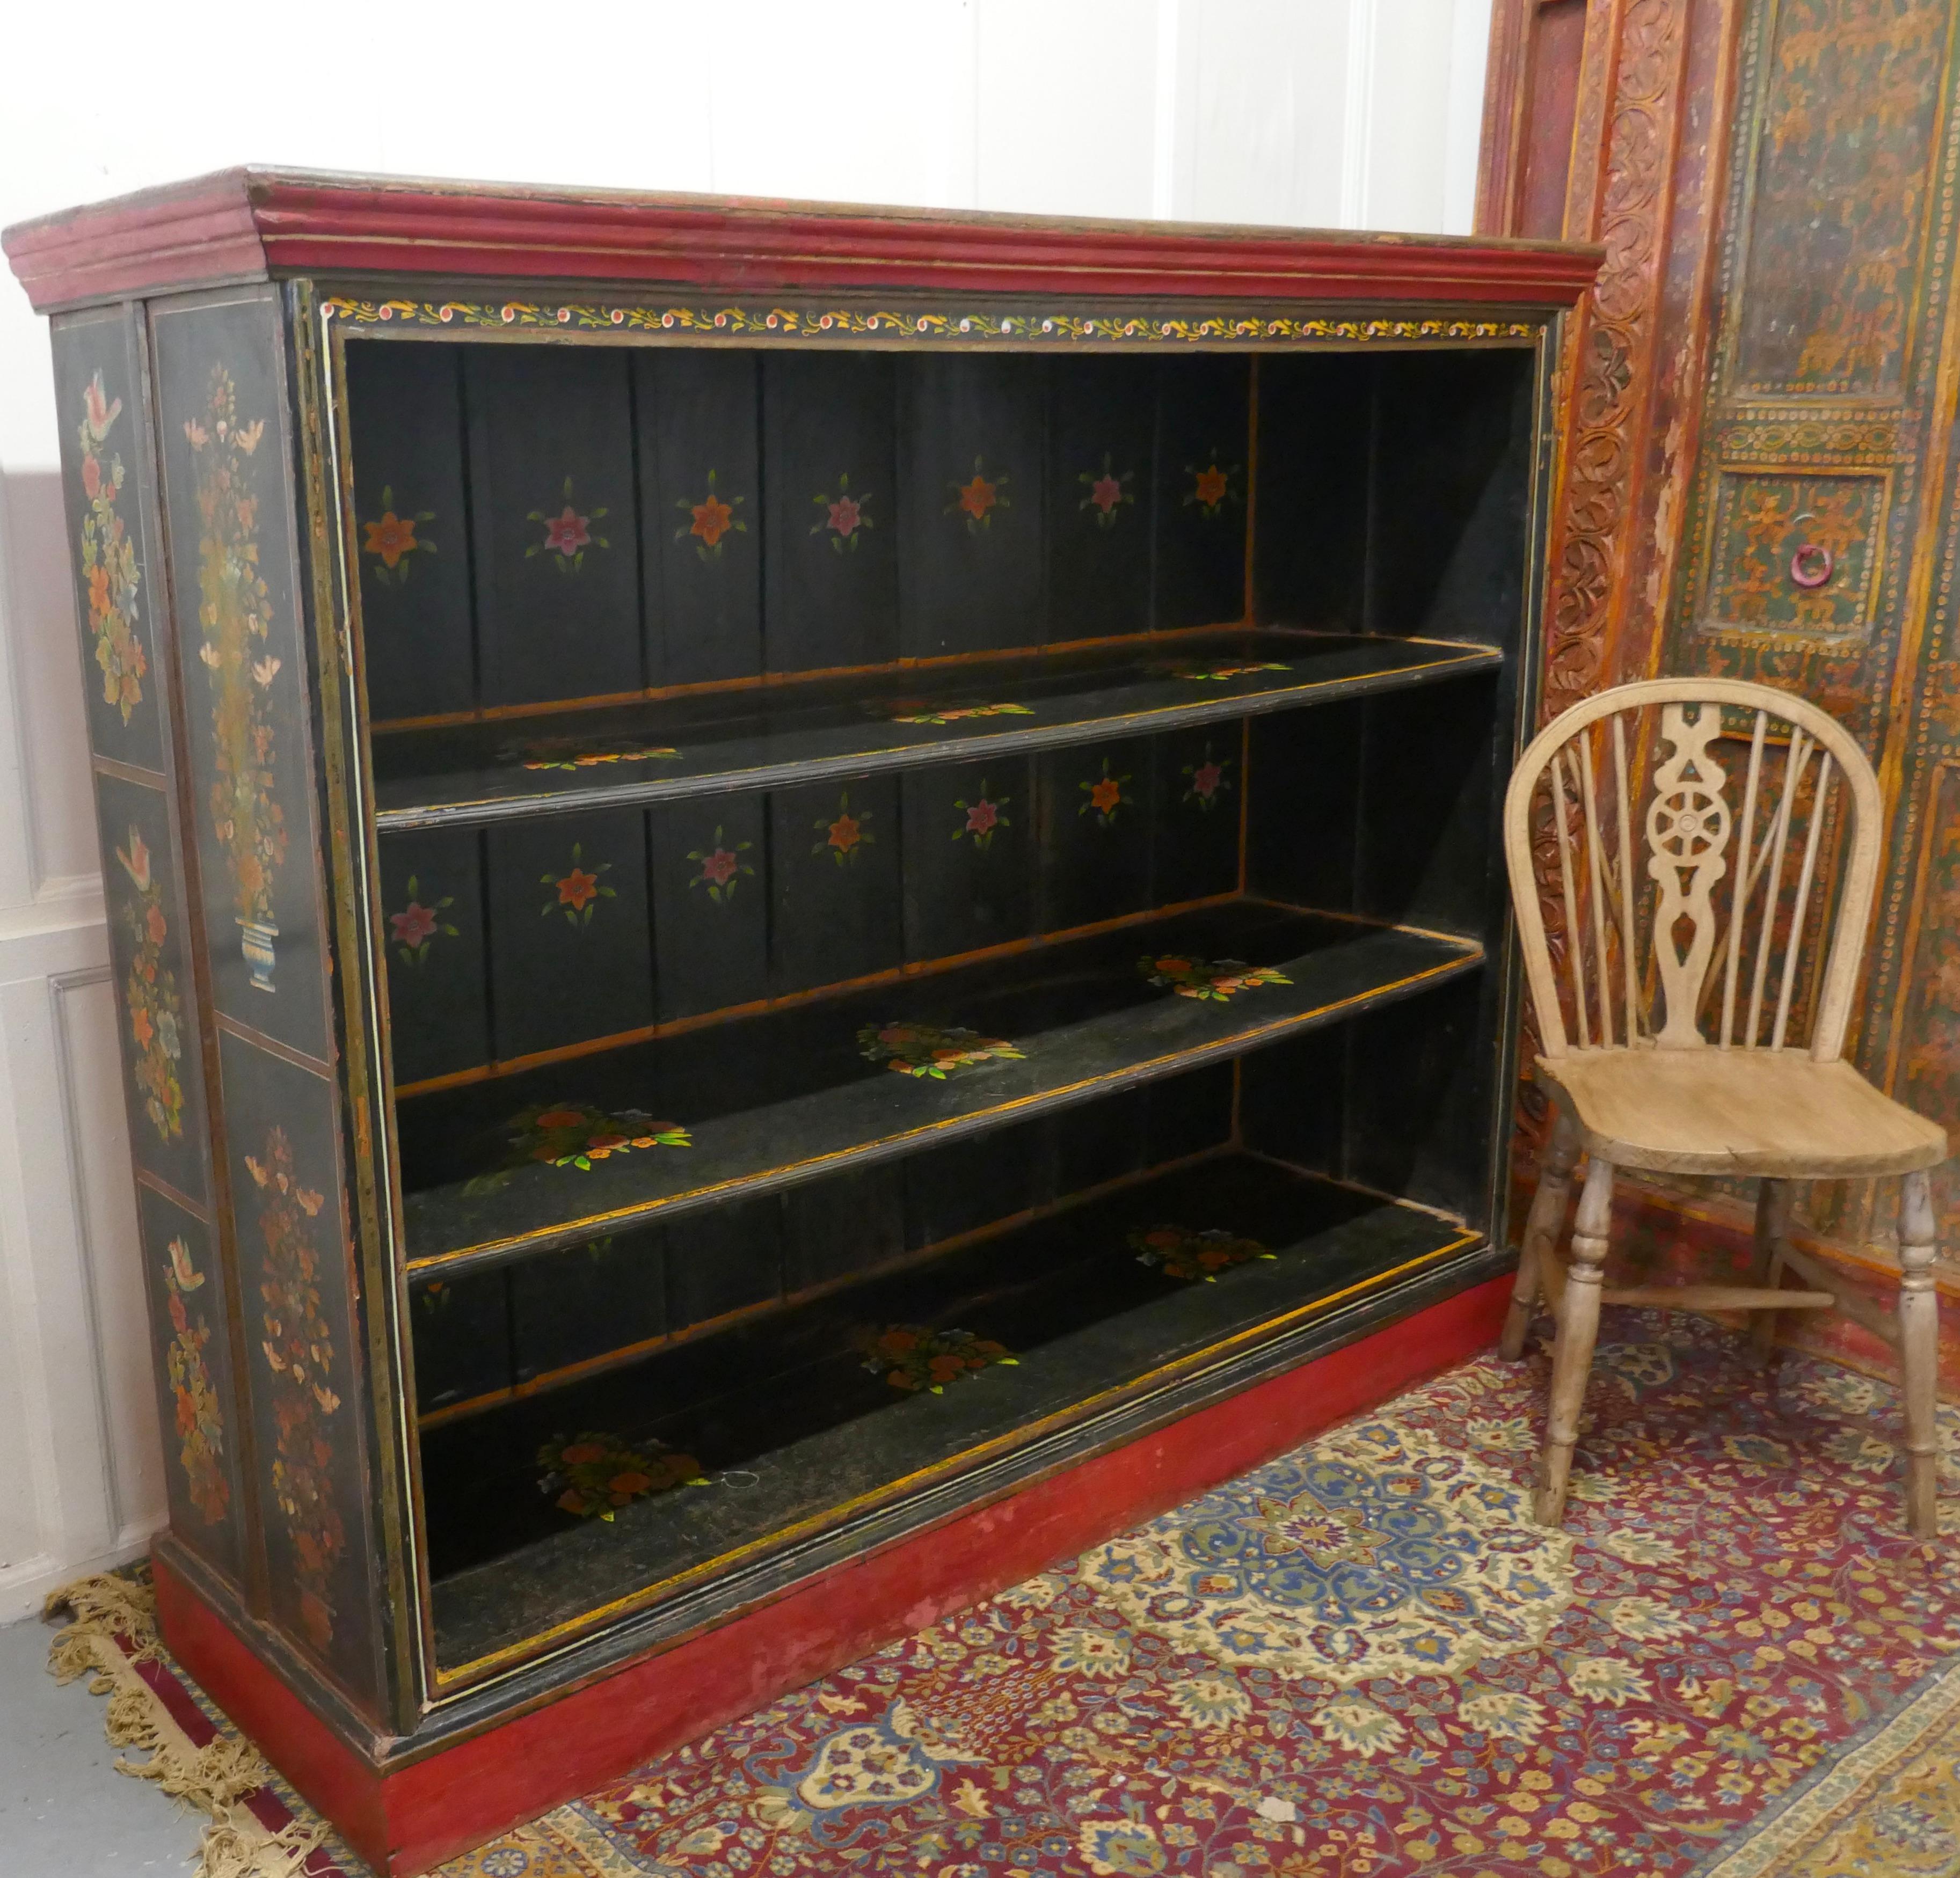 Large Folk Art painted open bookcase.

This is a larger than usual open fronted bookcase it is 20” deep
The bookcase is painted in the traditional colorful Folk Art Style with birds and flowers on a black background and it stands on a high